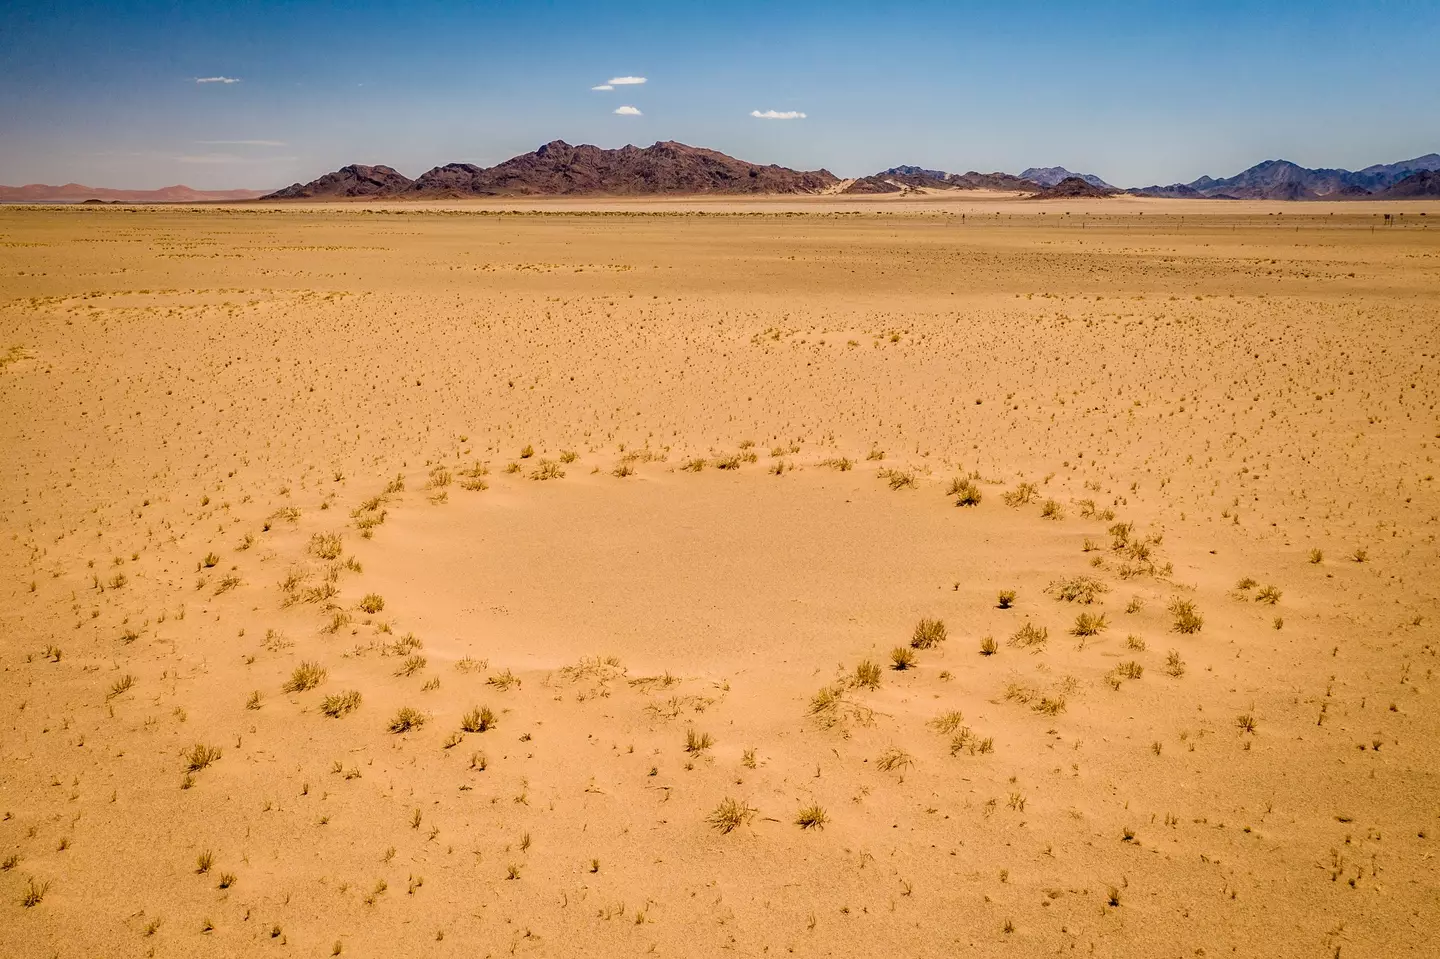 A so-called 'fairy circle' in Namibia.